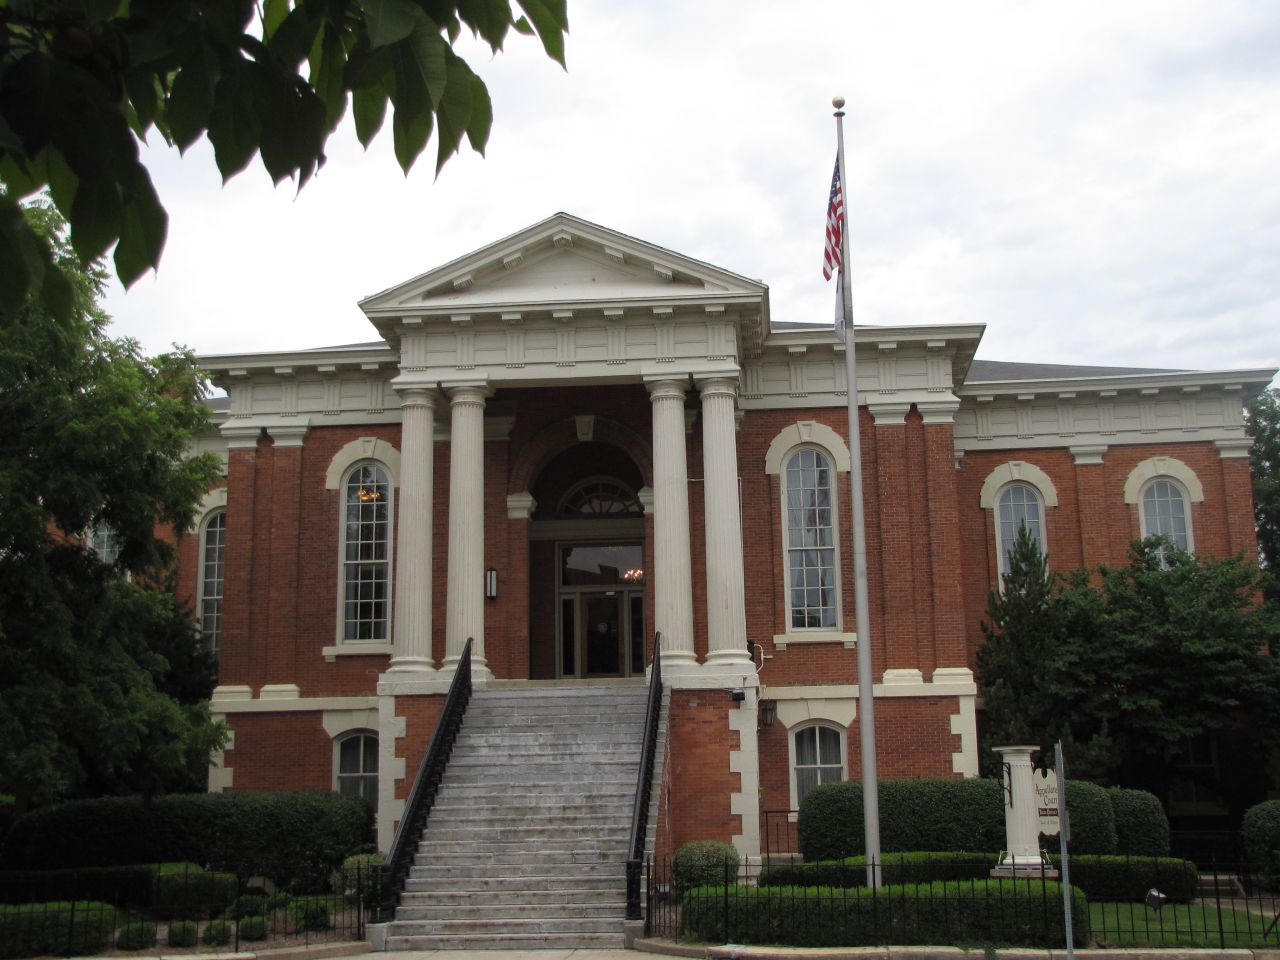 The 3rd Appellate Court Building in Ottawa serves 21 counties.